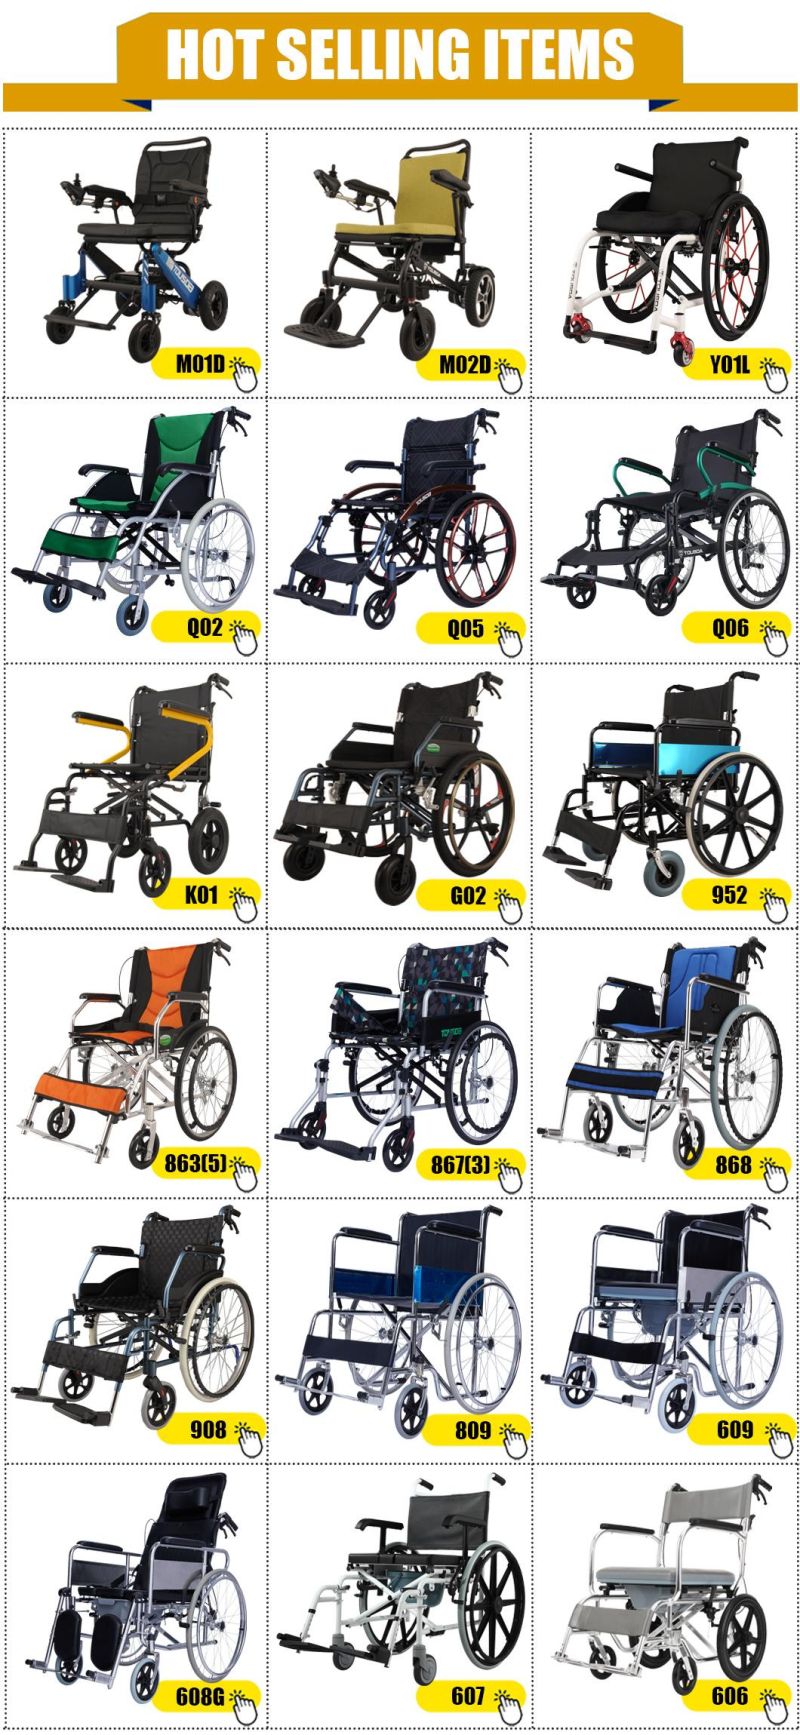 Silla De Ruedas Scooter Price Medical Aluminum Toilet Shower Commode Sport Folding Manual Power 4 Wheels with Electric Wheel Chair for People with Disabilities